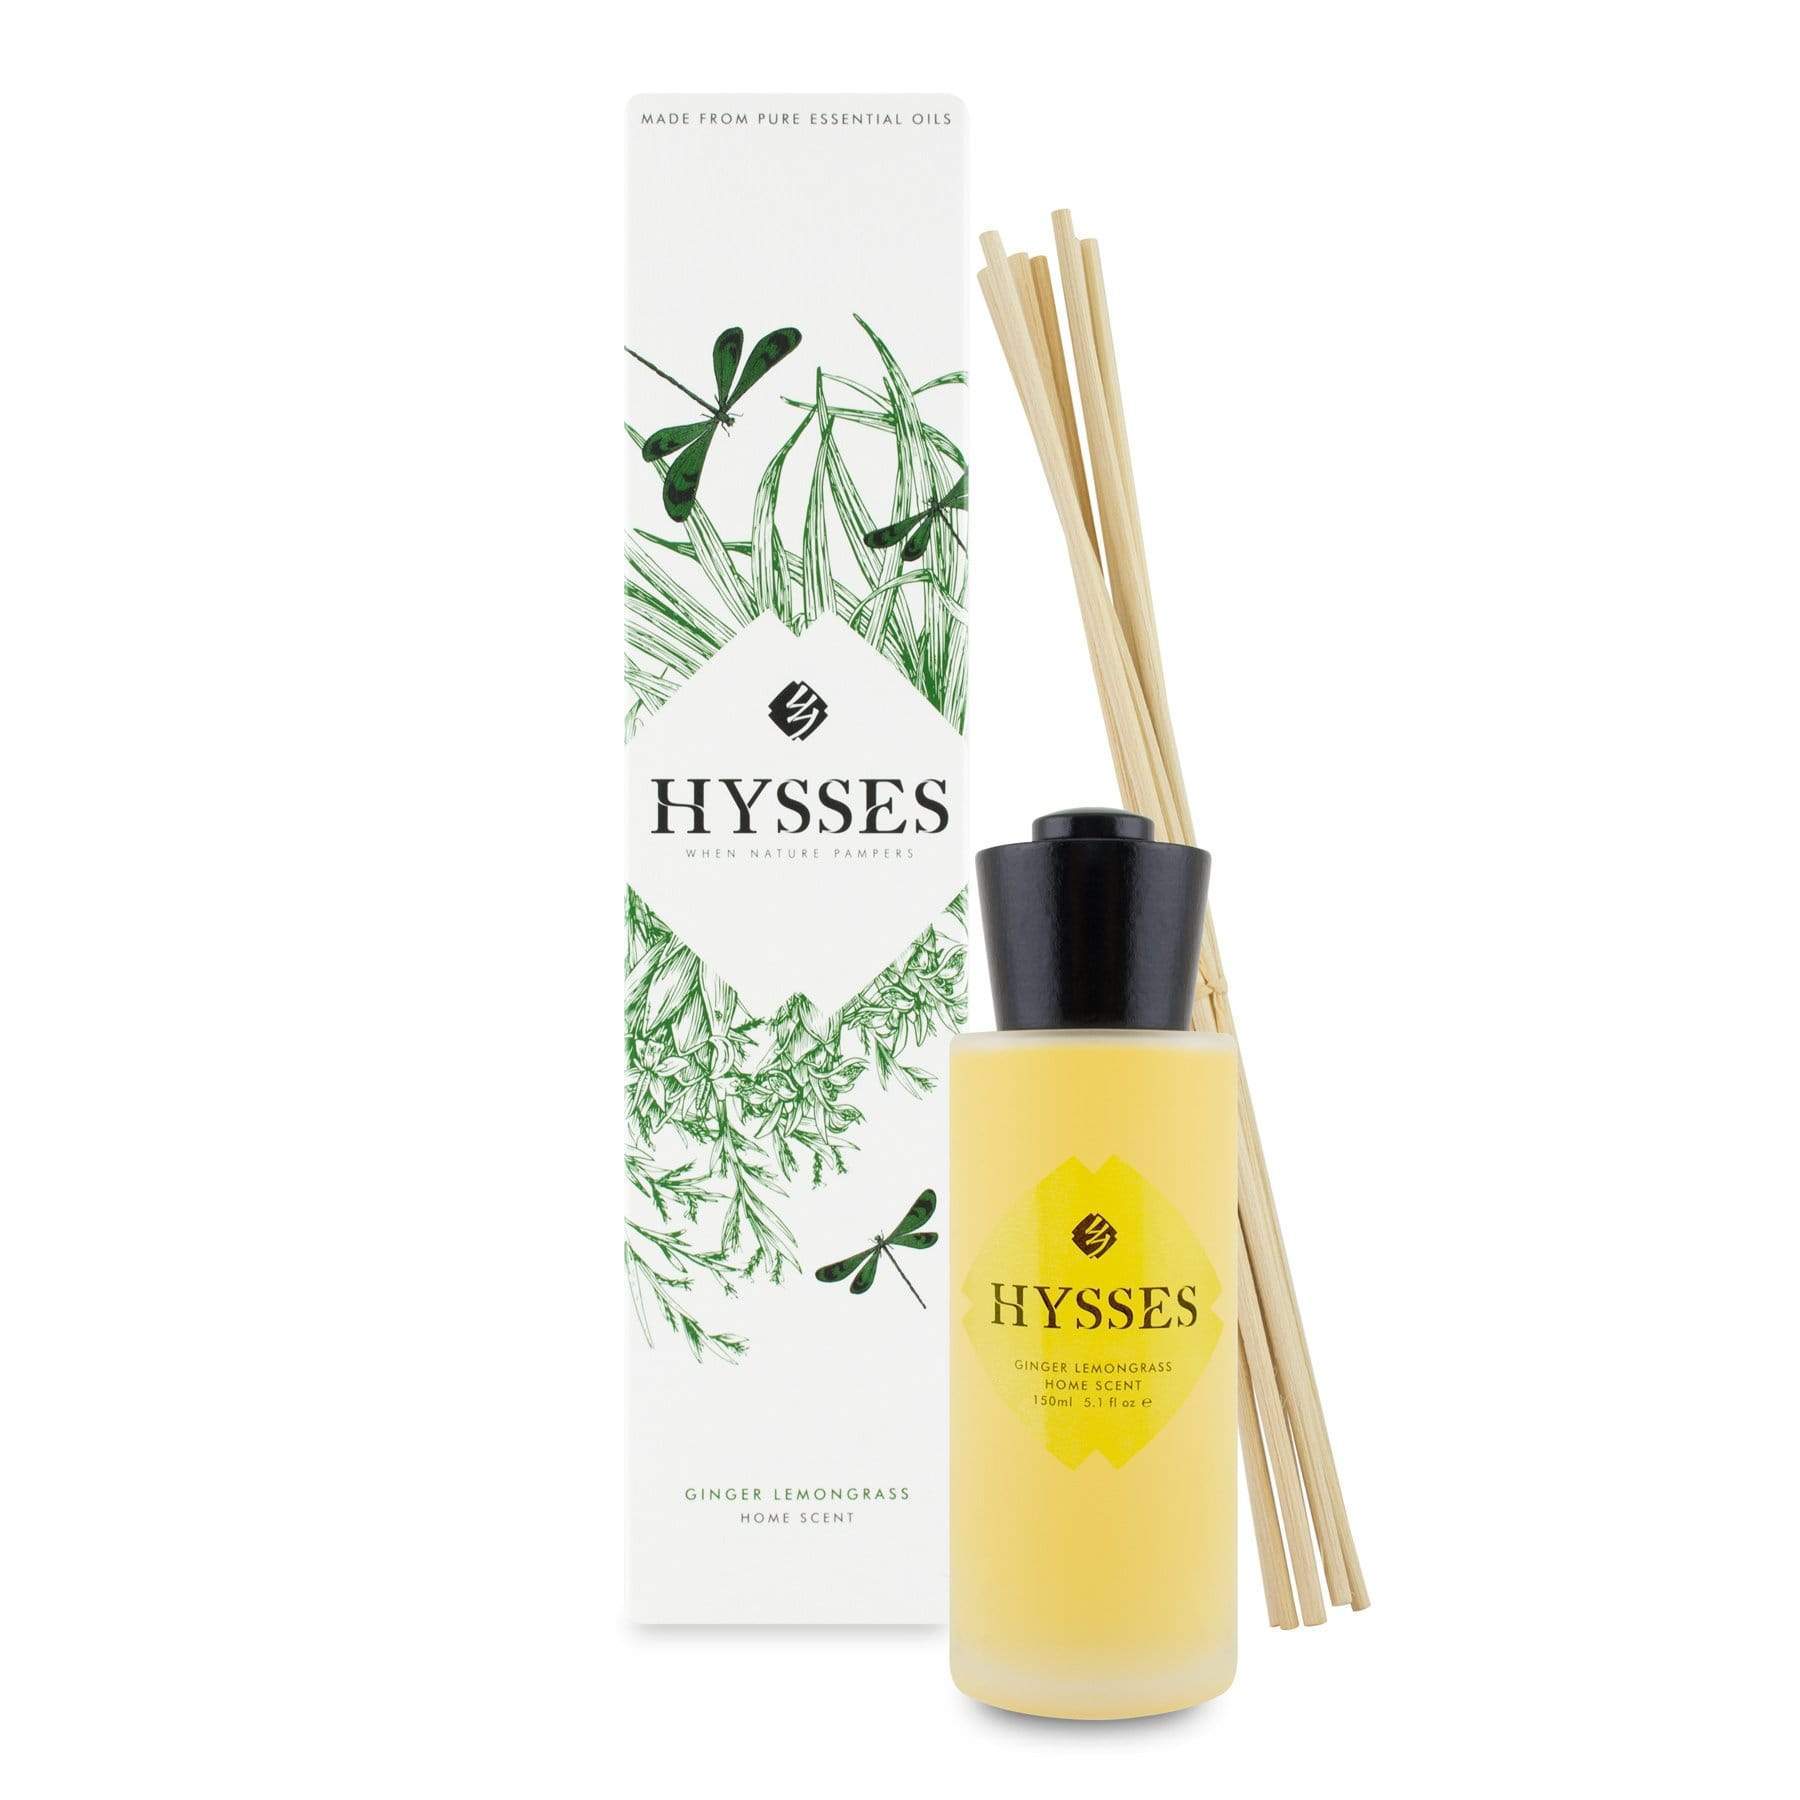 Hysses Home Scents 60ml Home Scent Reed Diffuser Ginger Lemongrass